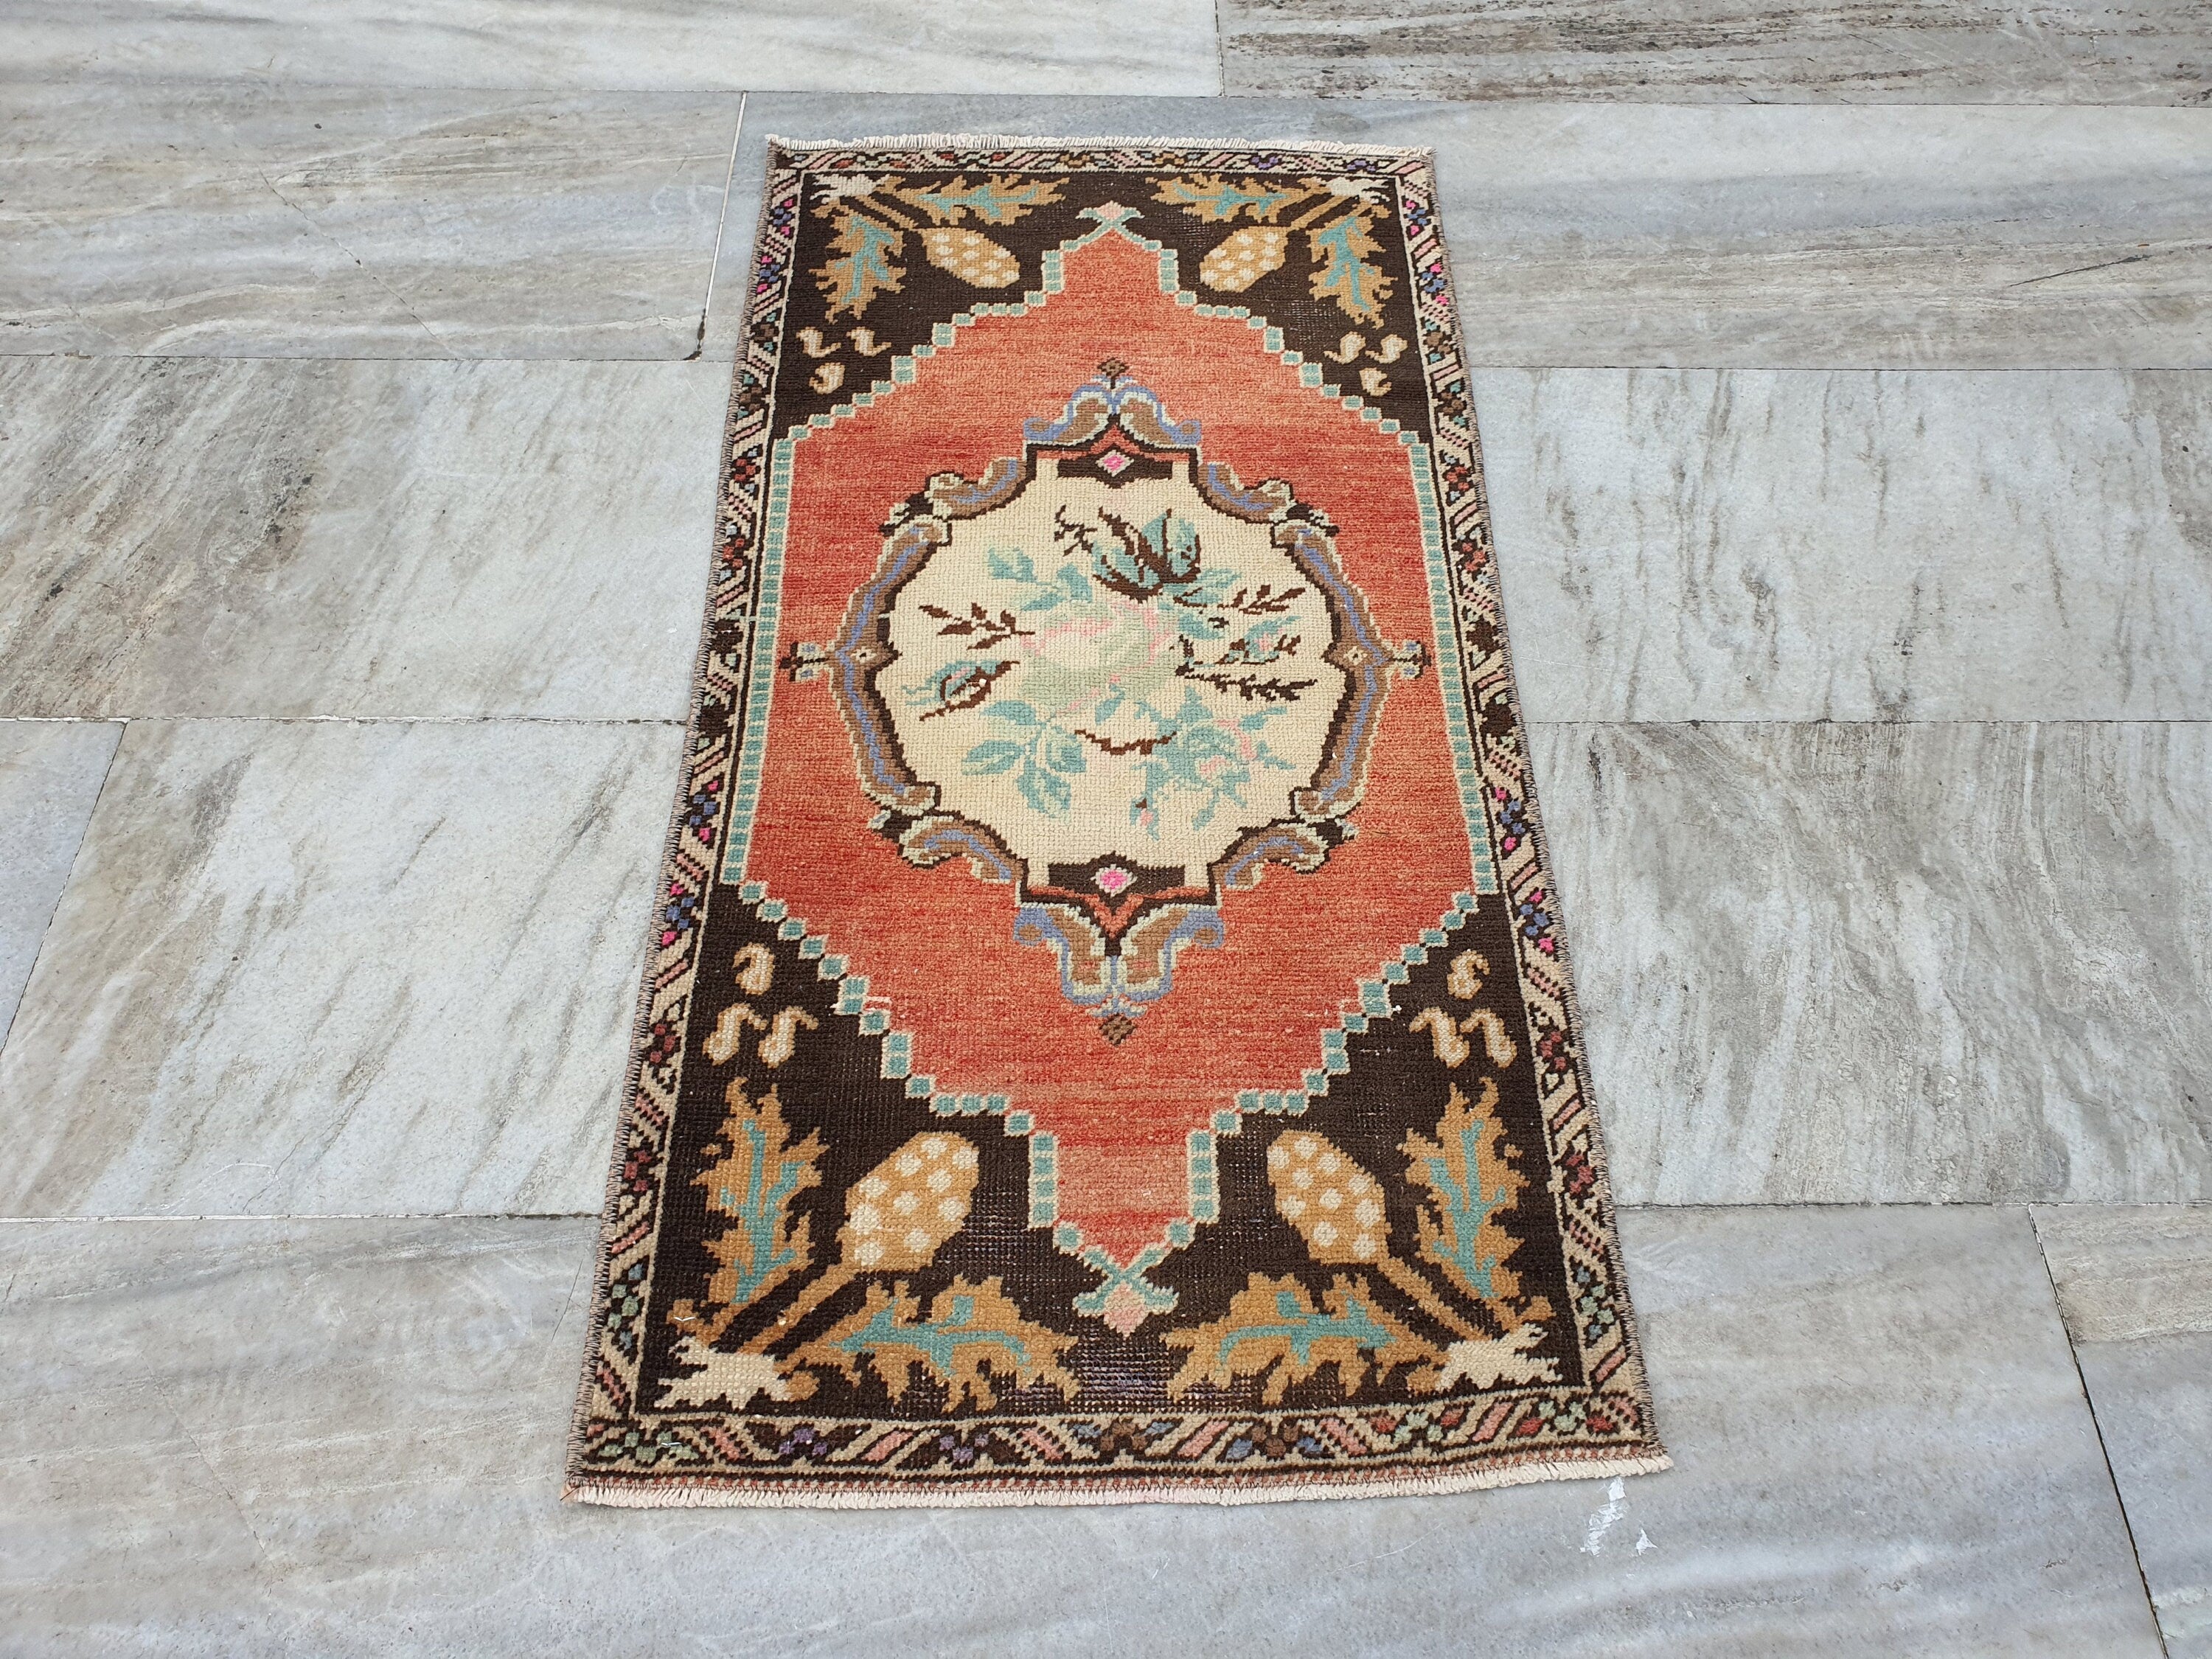 Vintage Turkish Small Rug, 3 ft 1 in x 1 ft 6 in, 	Red, Brown and Beige Faded Distressed Antique Style Mat